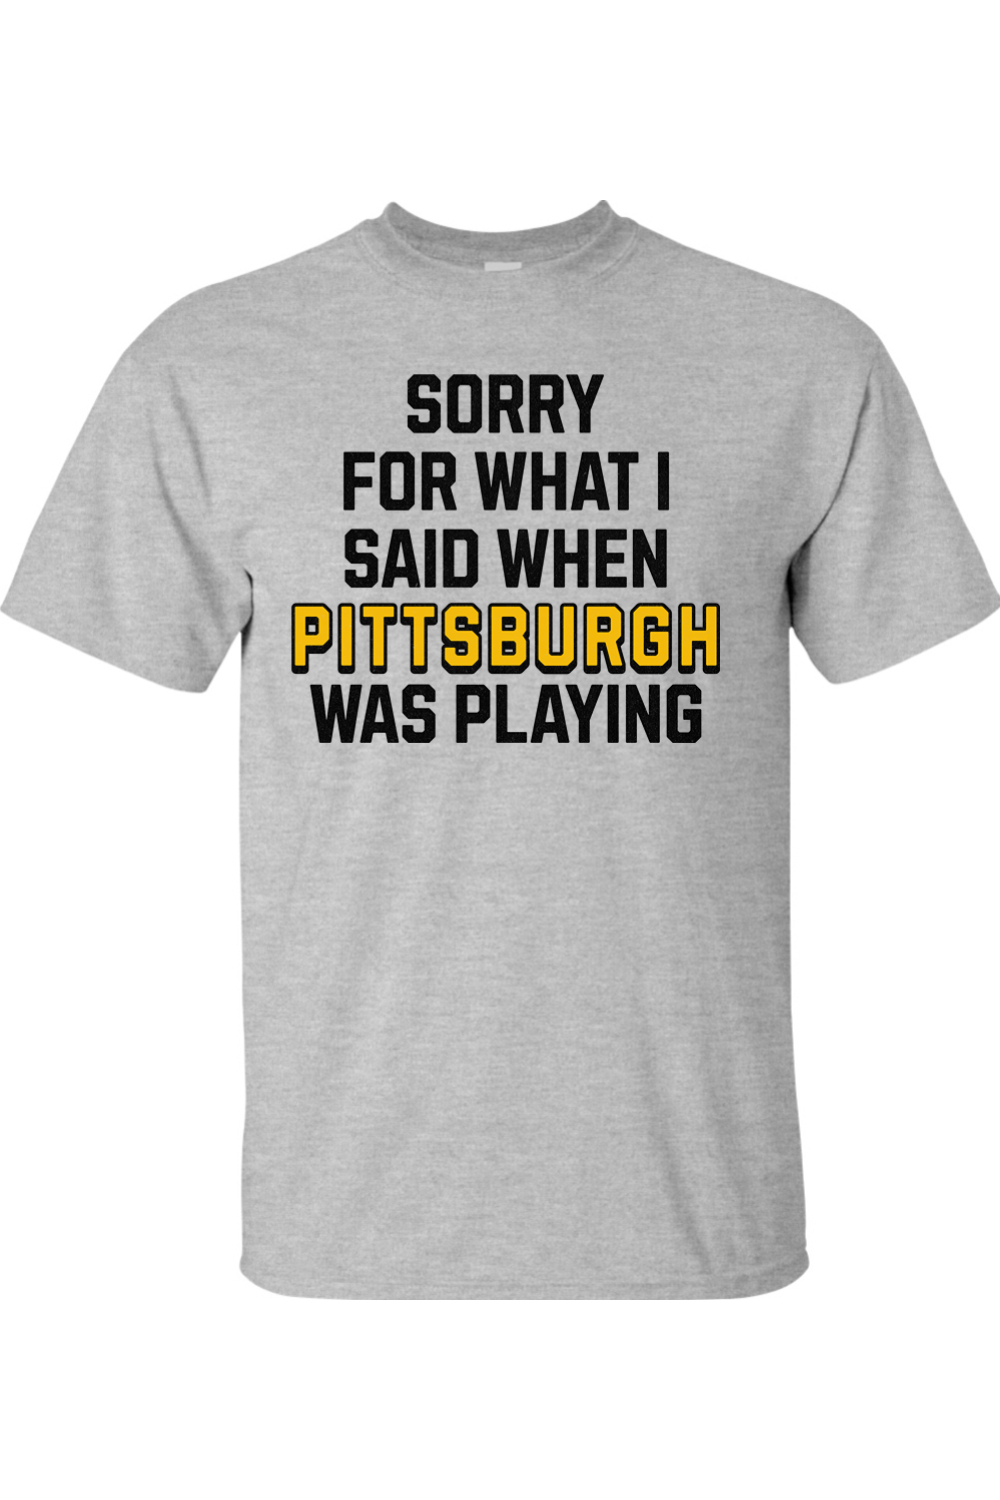 Sorry for What I Said When Pittsburgh Was Playing - Big & Tall T-Shirt - Yinzylvania